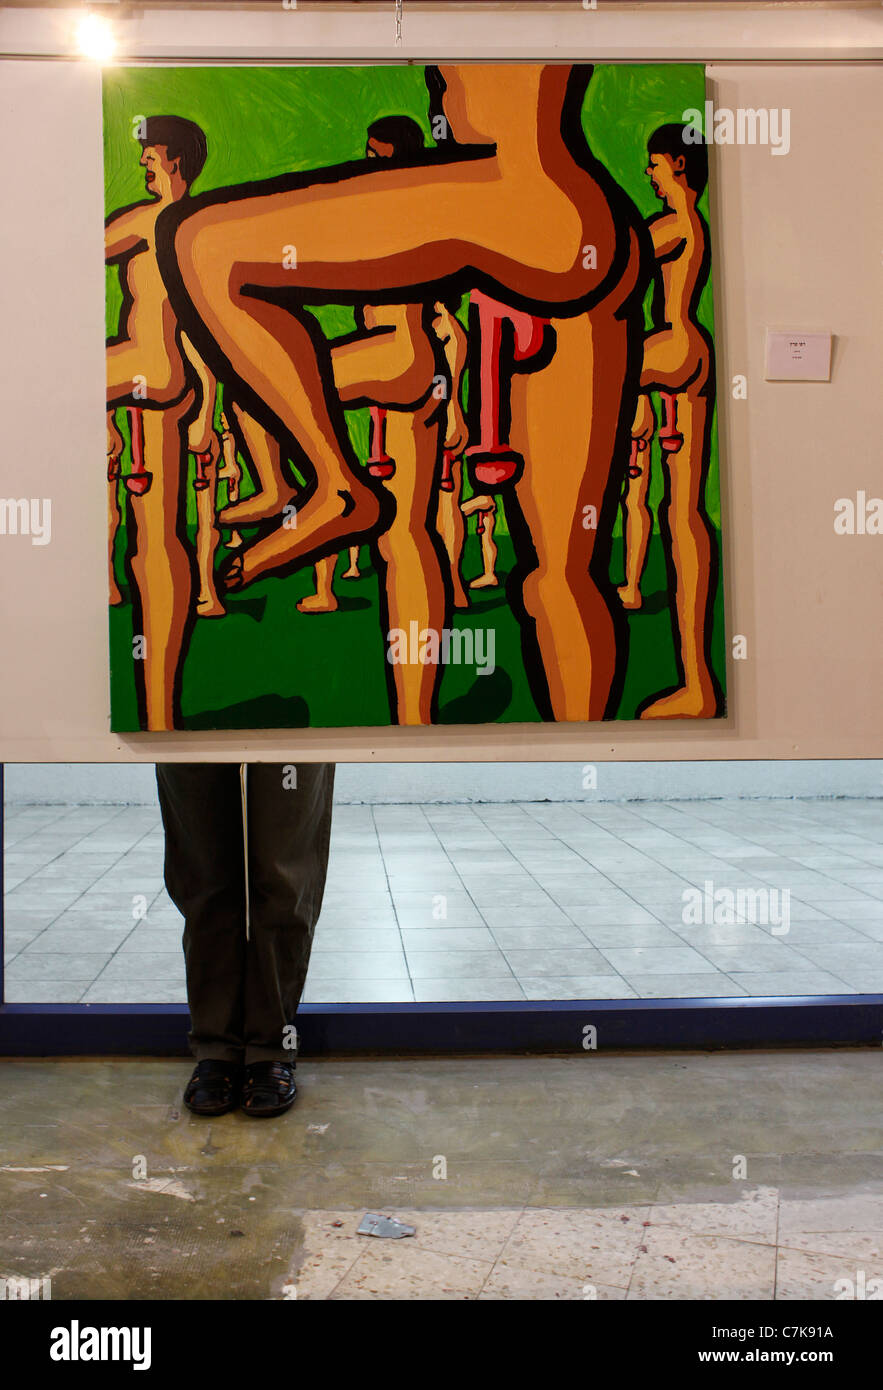 A visitor stands behind artwork by Israeli artist Rafi Peretz, displayed in a public space in Tel Aviv. Israel. 15 Israeli visual artists were selected for an exhibition entitled 'Protest'. They used the social protest that is taking place in Israel as inspiration for their artwork. Stock Photo